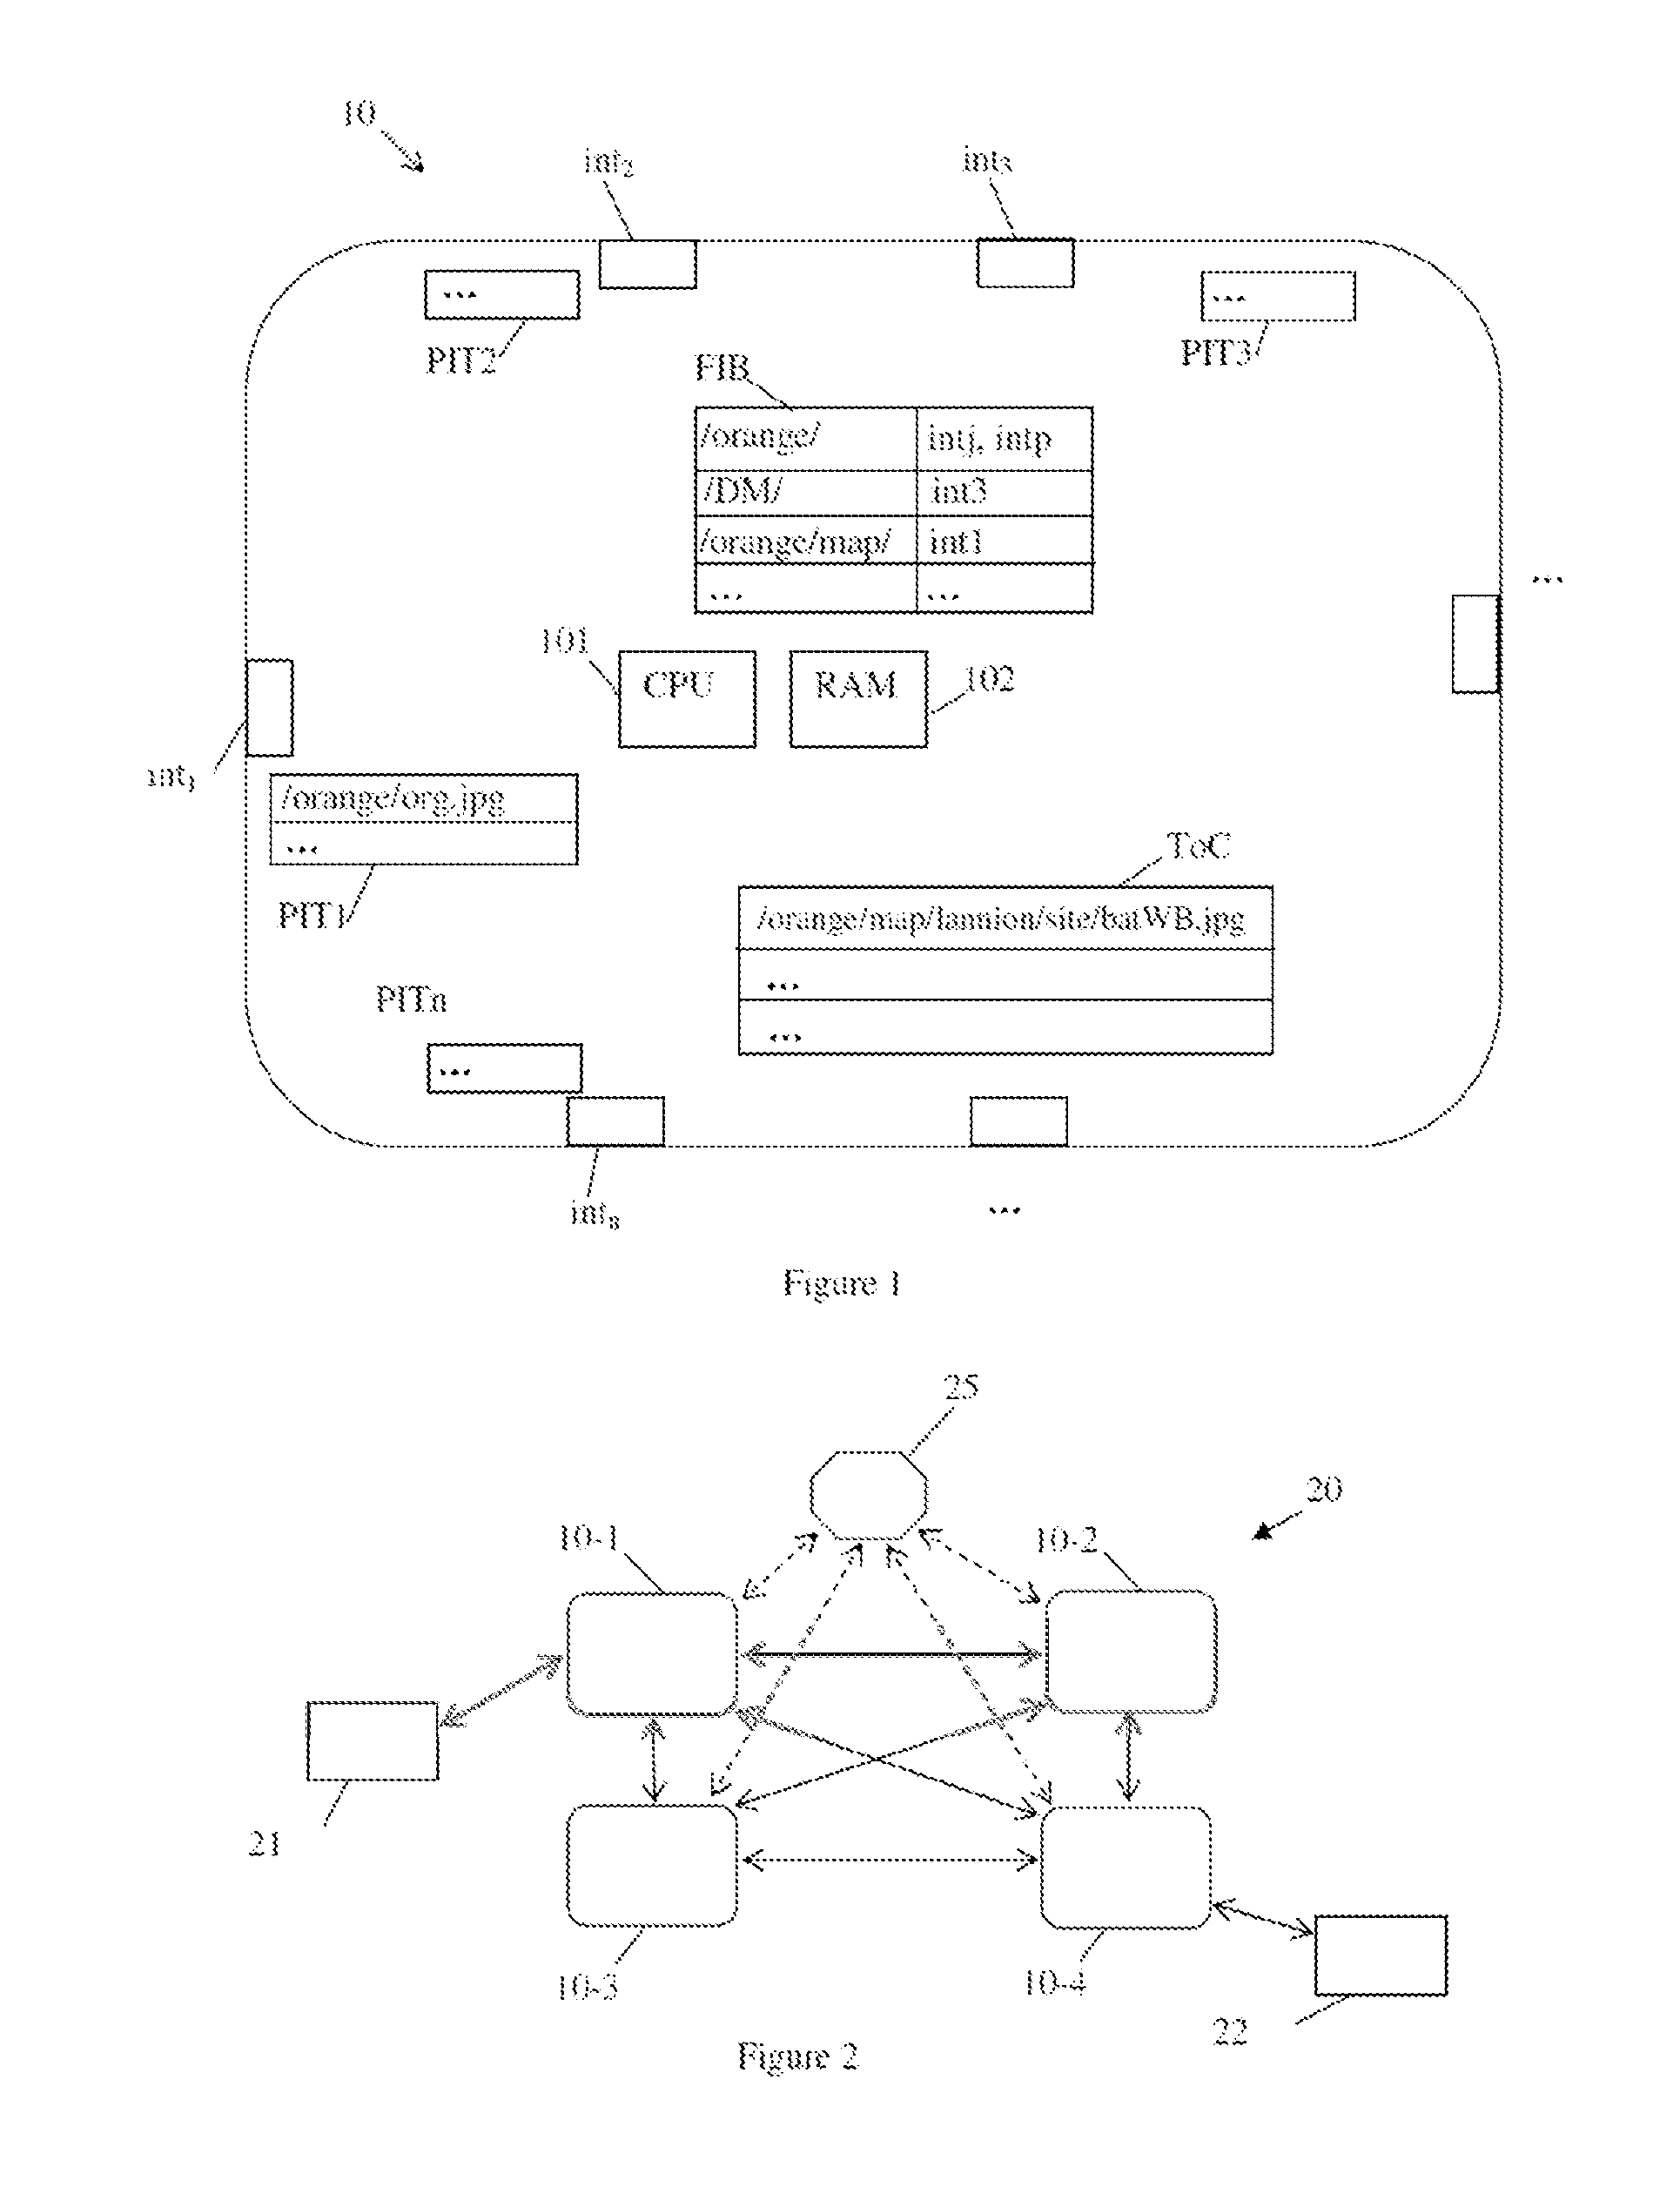 Method for Processing a Request in an Information-Centric Communication Network